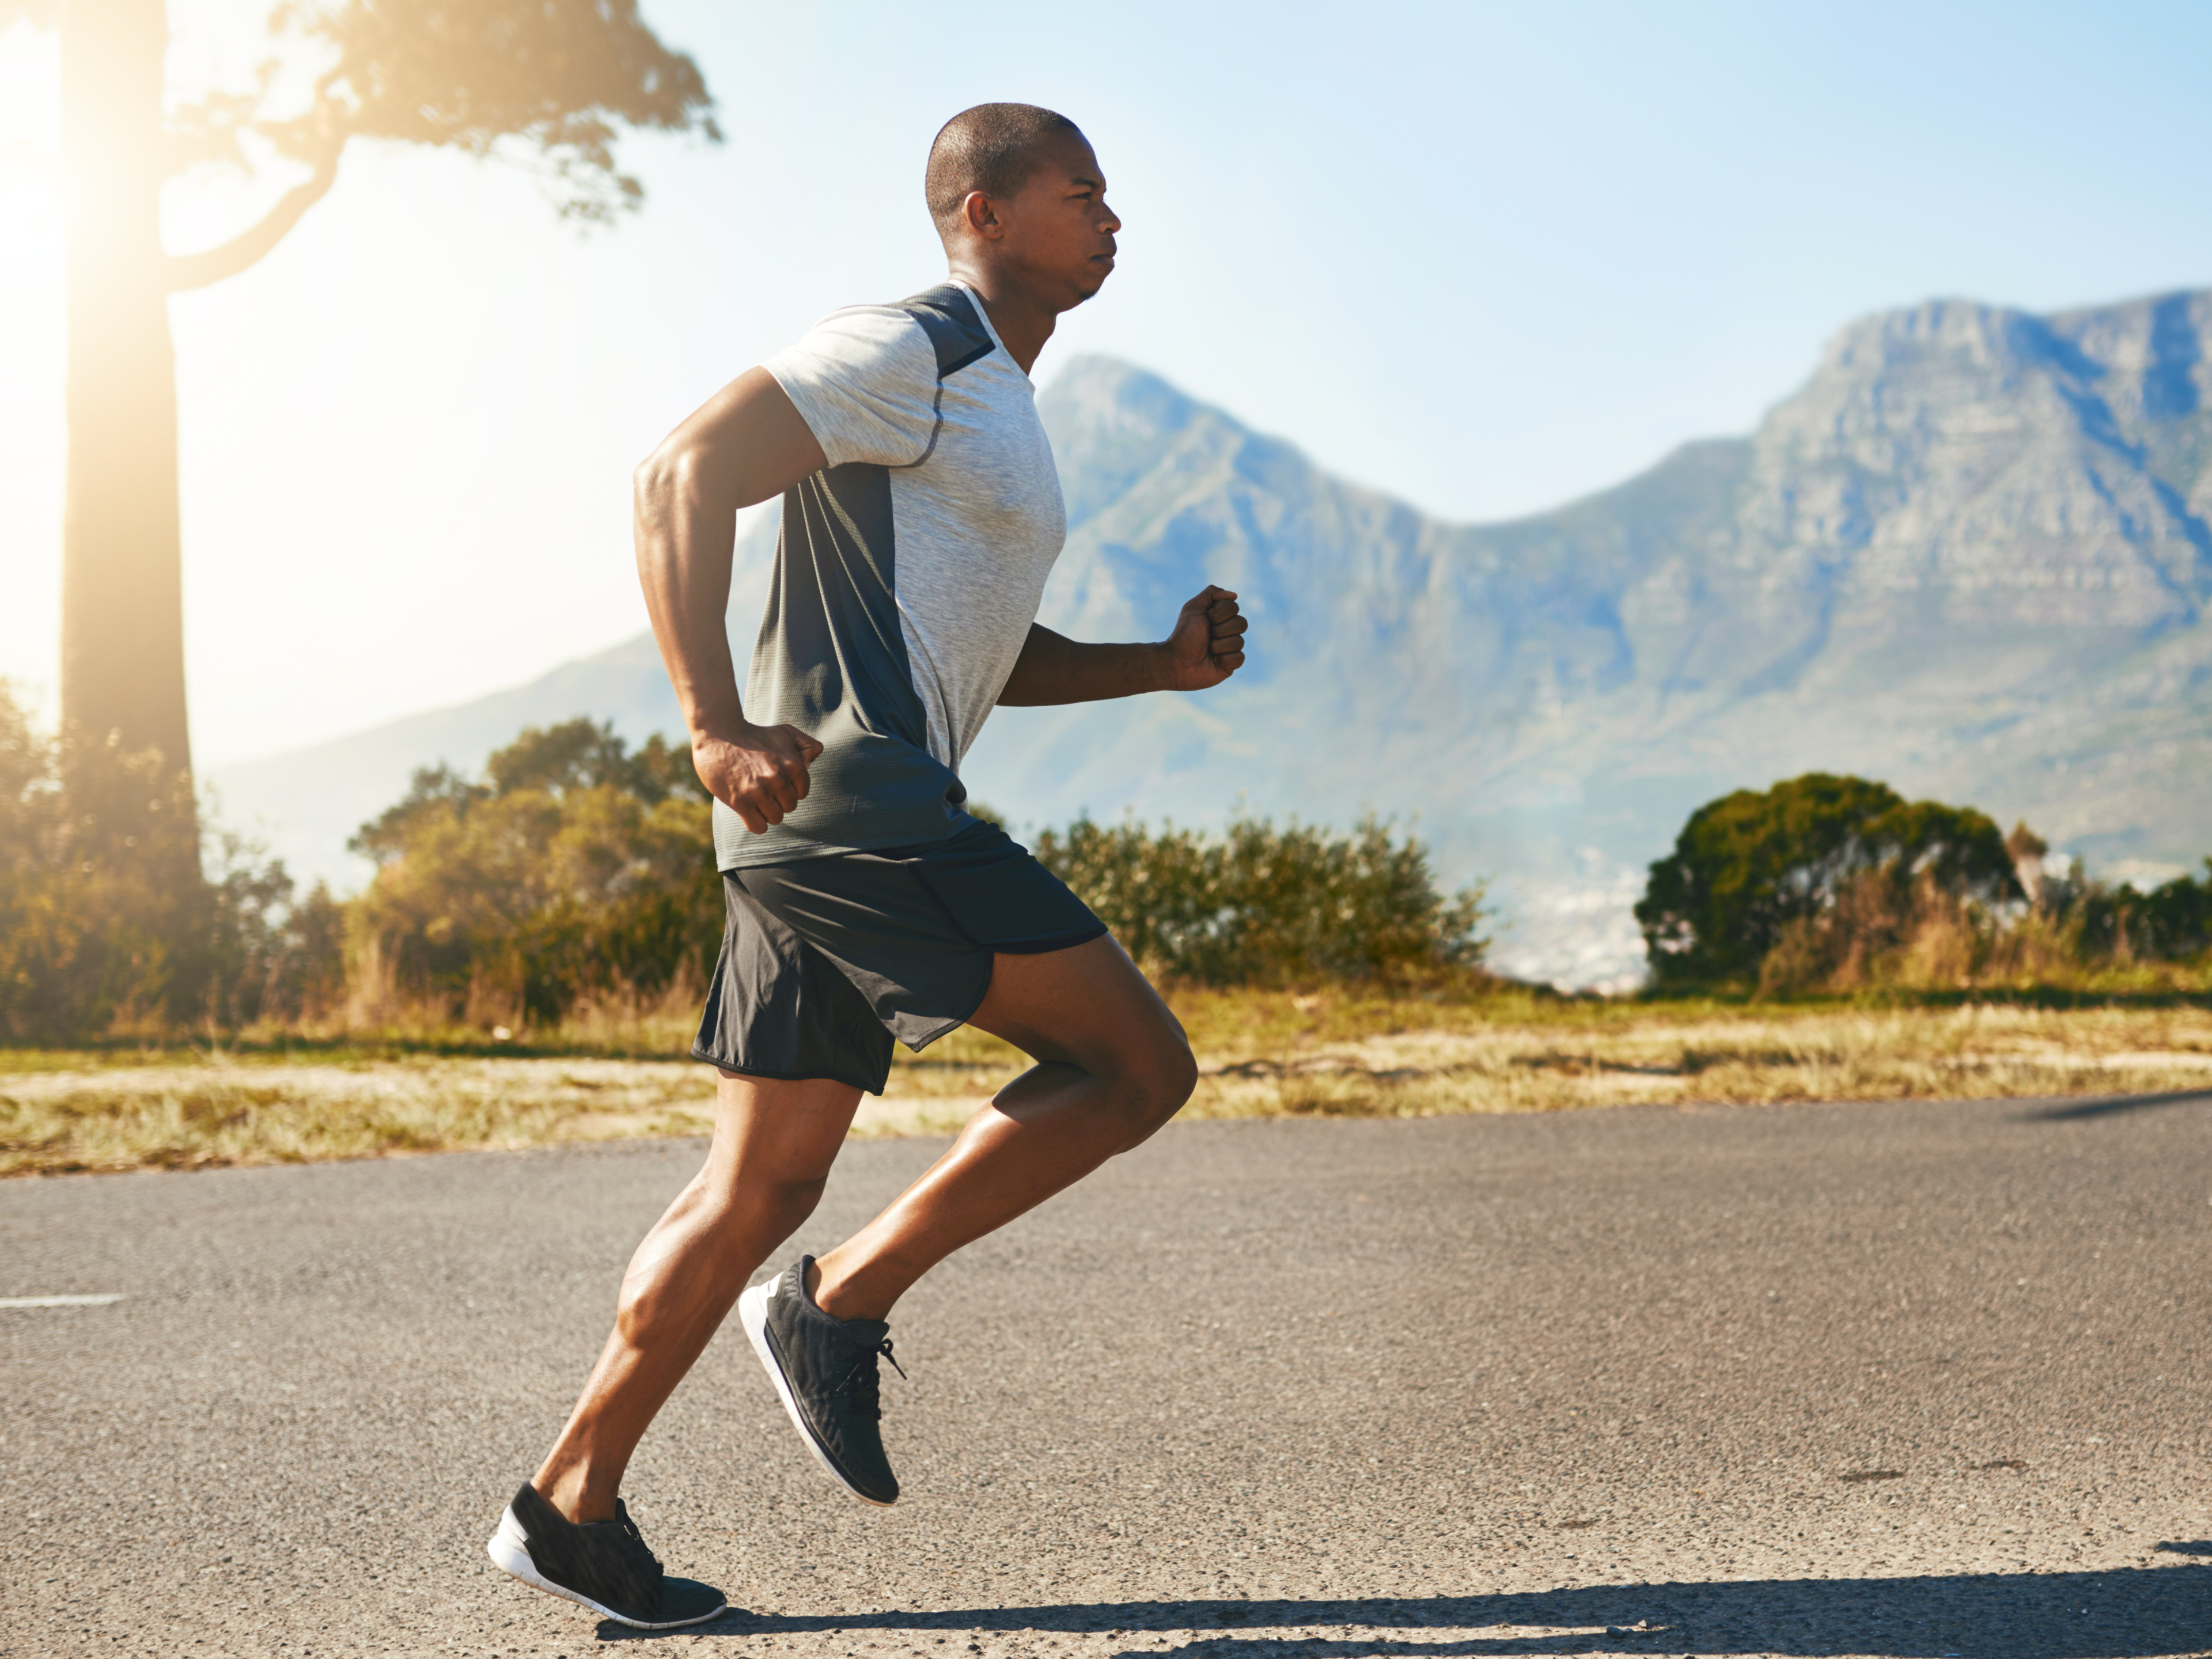 You may be able to continue running while recovering from gluteal tendinopathy if you can adjust your training so it doesn't aggravate your symptoms.